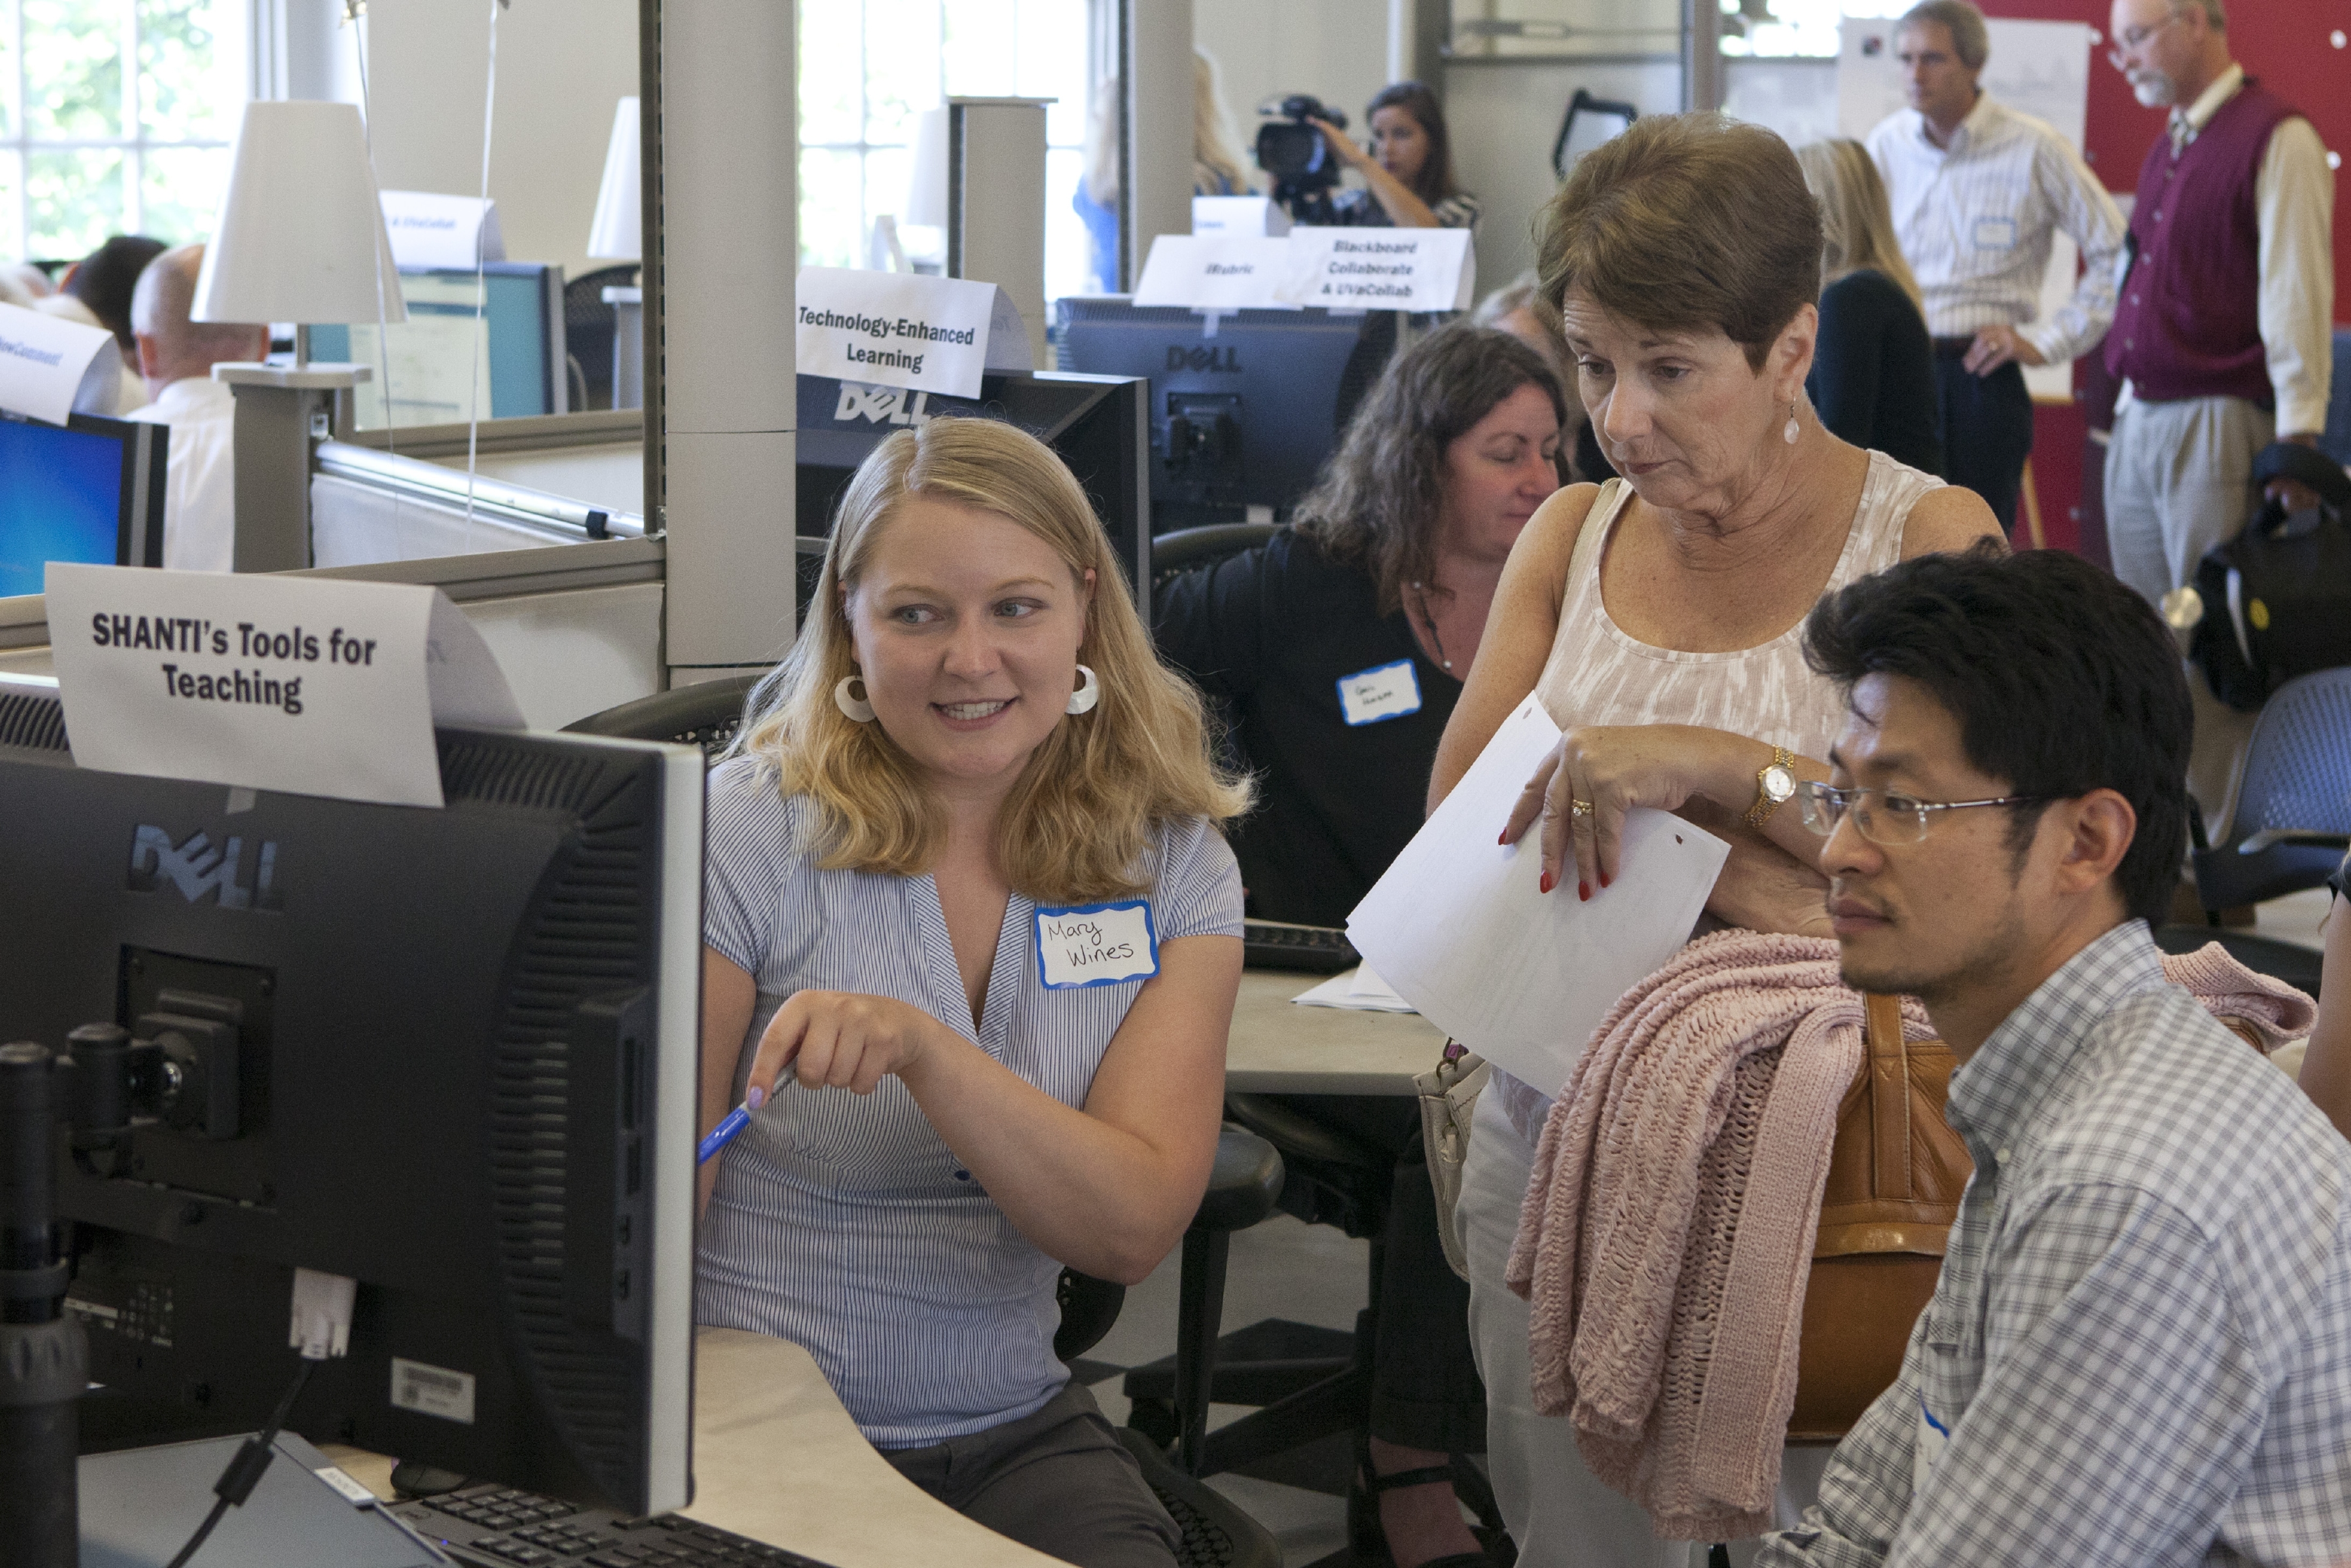 Students talking to an elderly woman at a computer